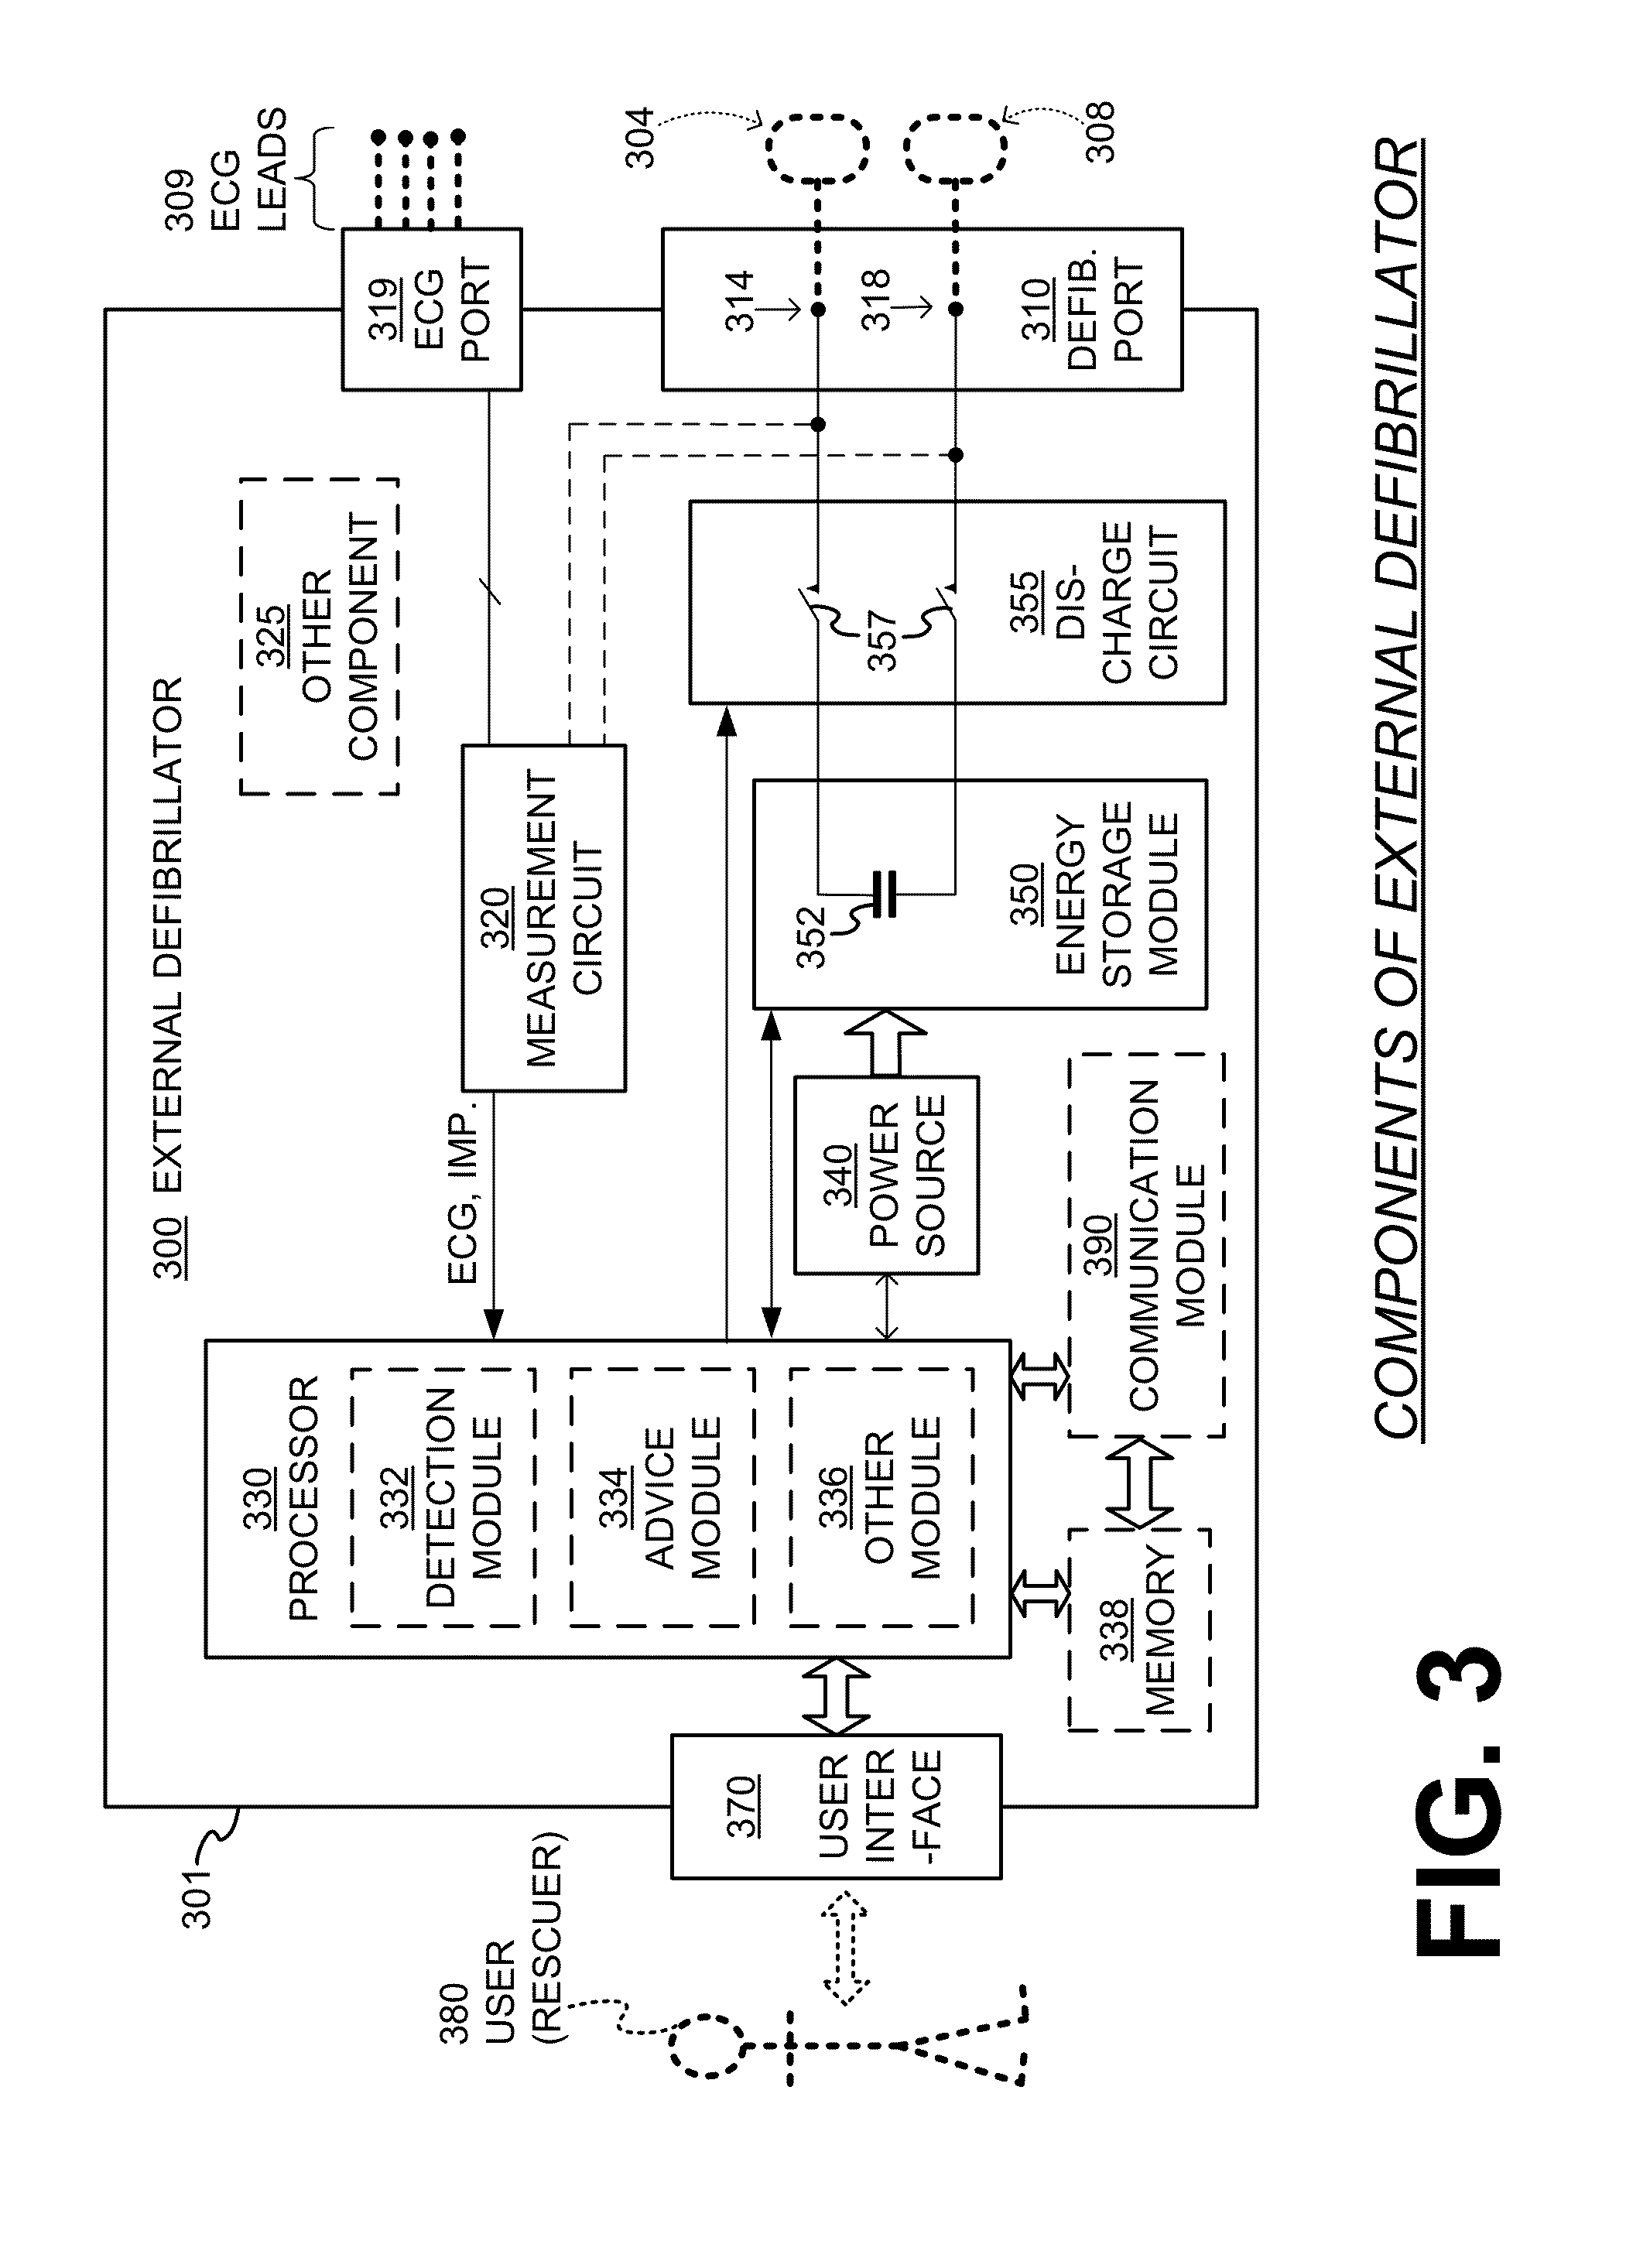 System and method for electrocardiogram analysis and optimization of cardiopulmonary resuscitation and therapy delivery